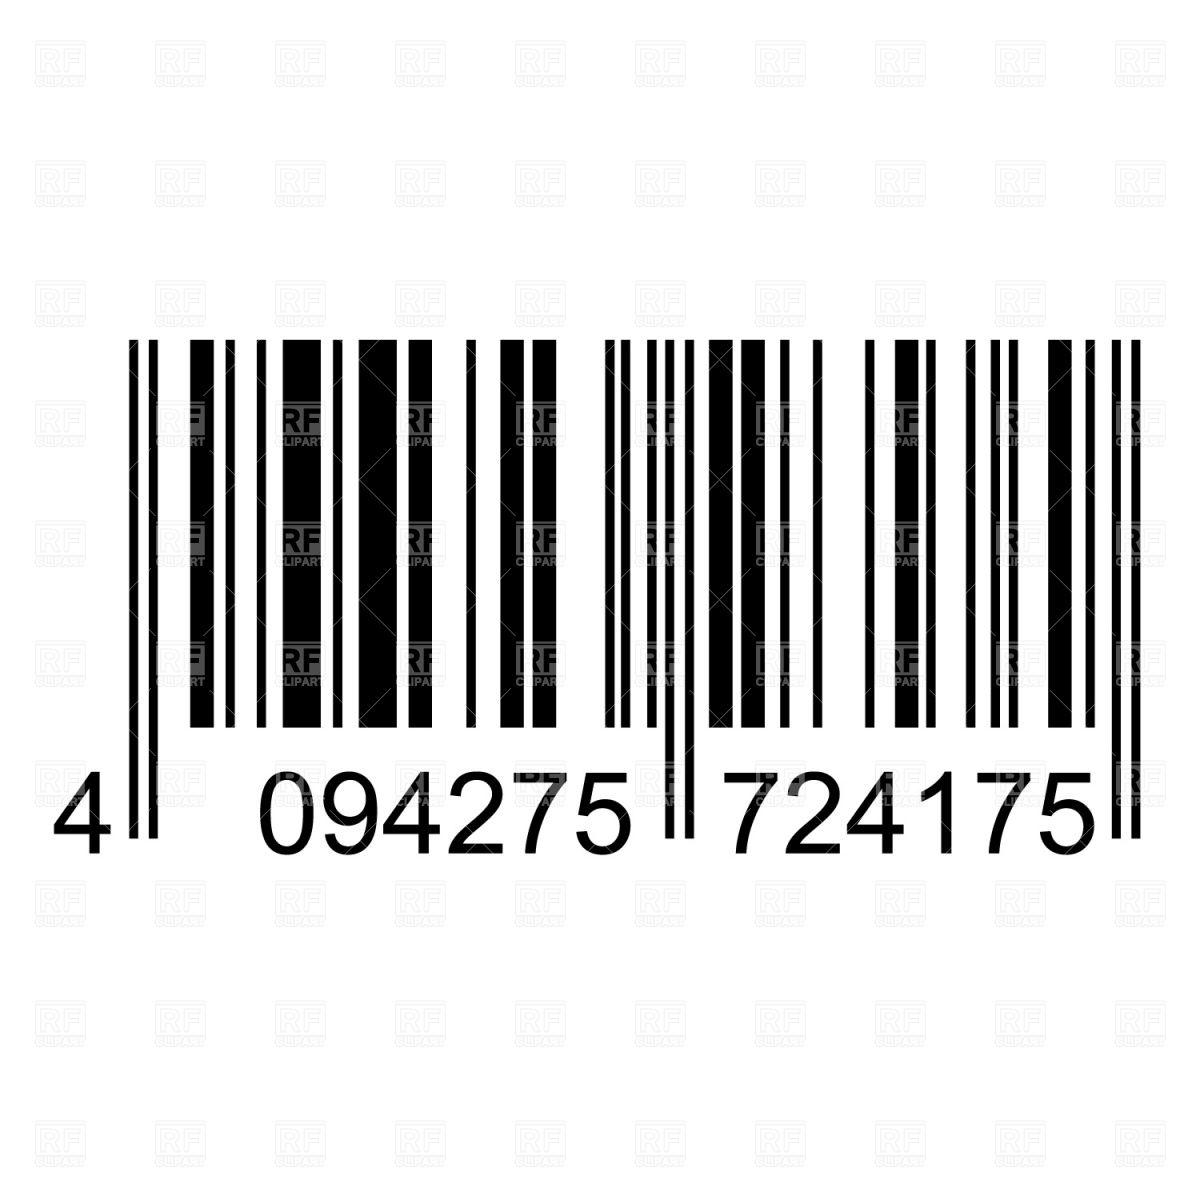 Bar Code 1320 Download Royalty Free Vector Clipart  Eps